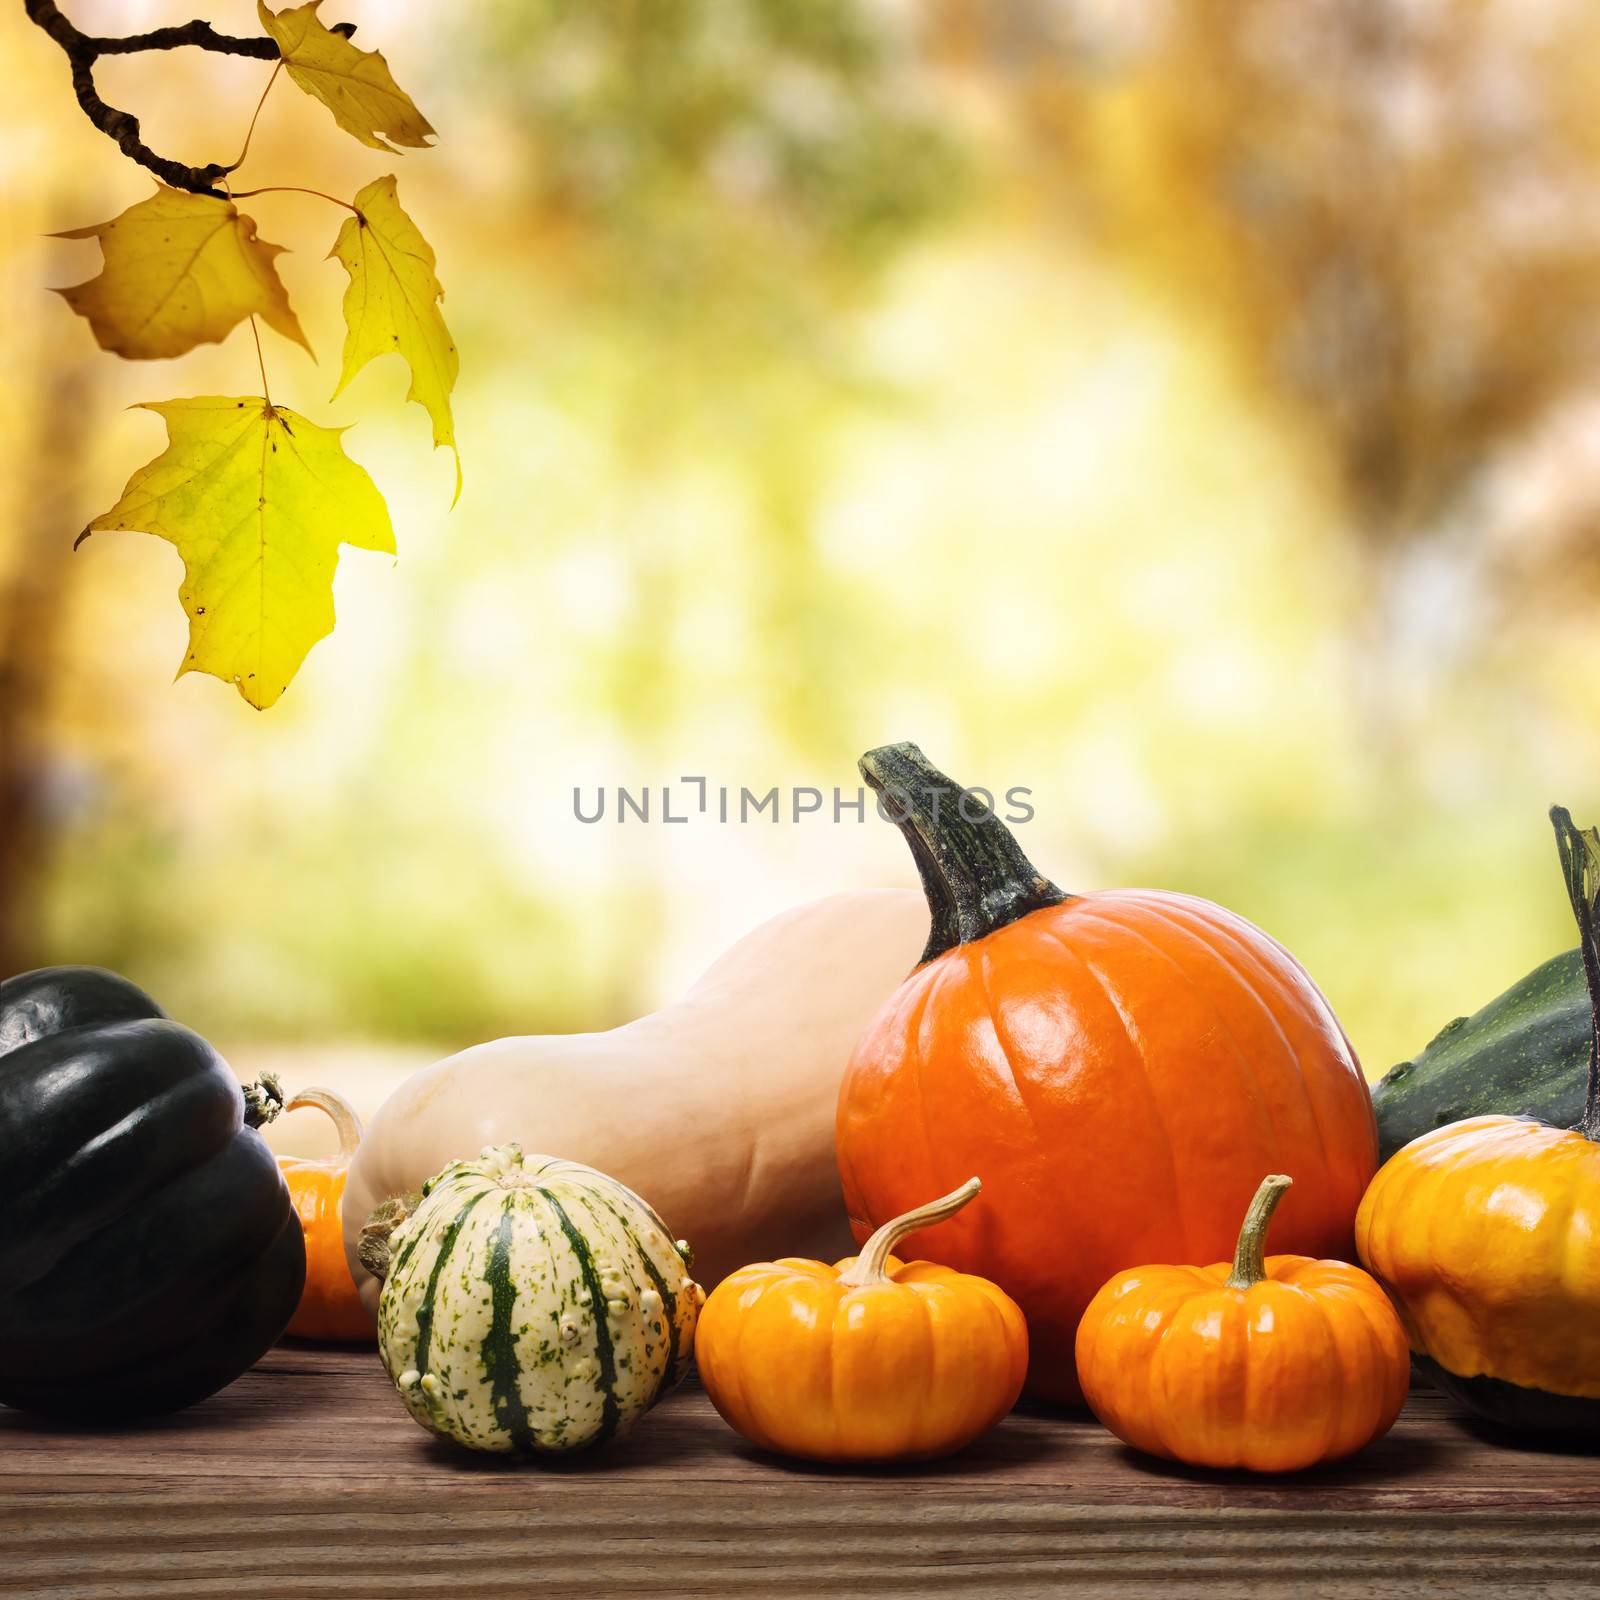 Pumpkins and squashes with a shinning fall background by melpomene